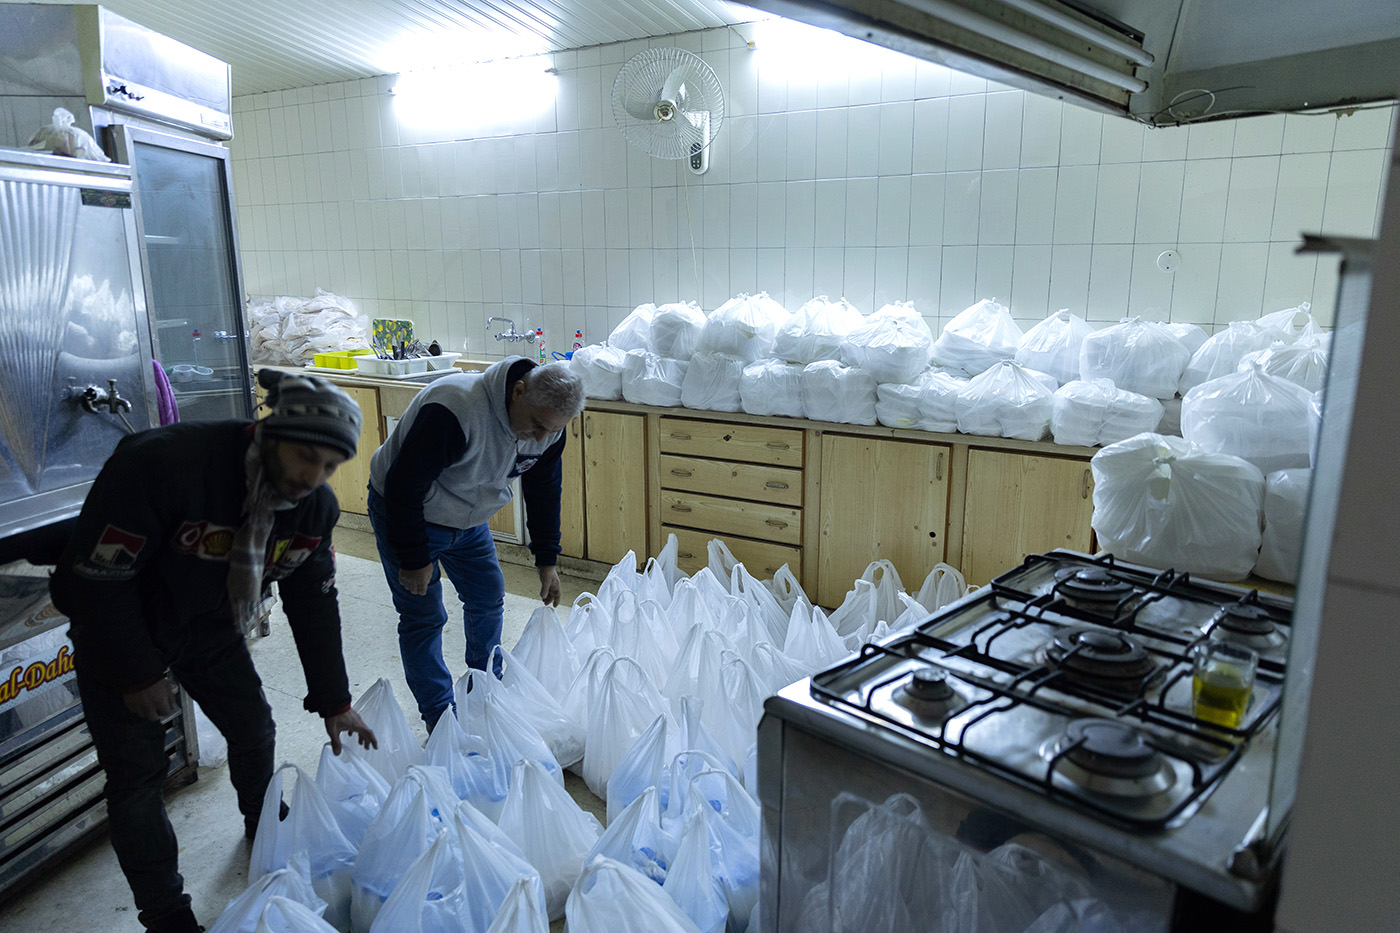 Volunteers from the Middle East Council of Churches pack and distribute emergency supplies to earthquake survivors in northern Syria.